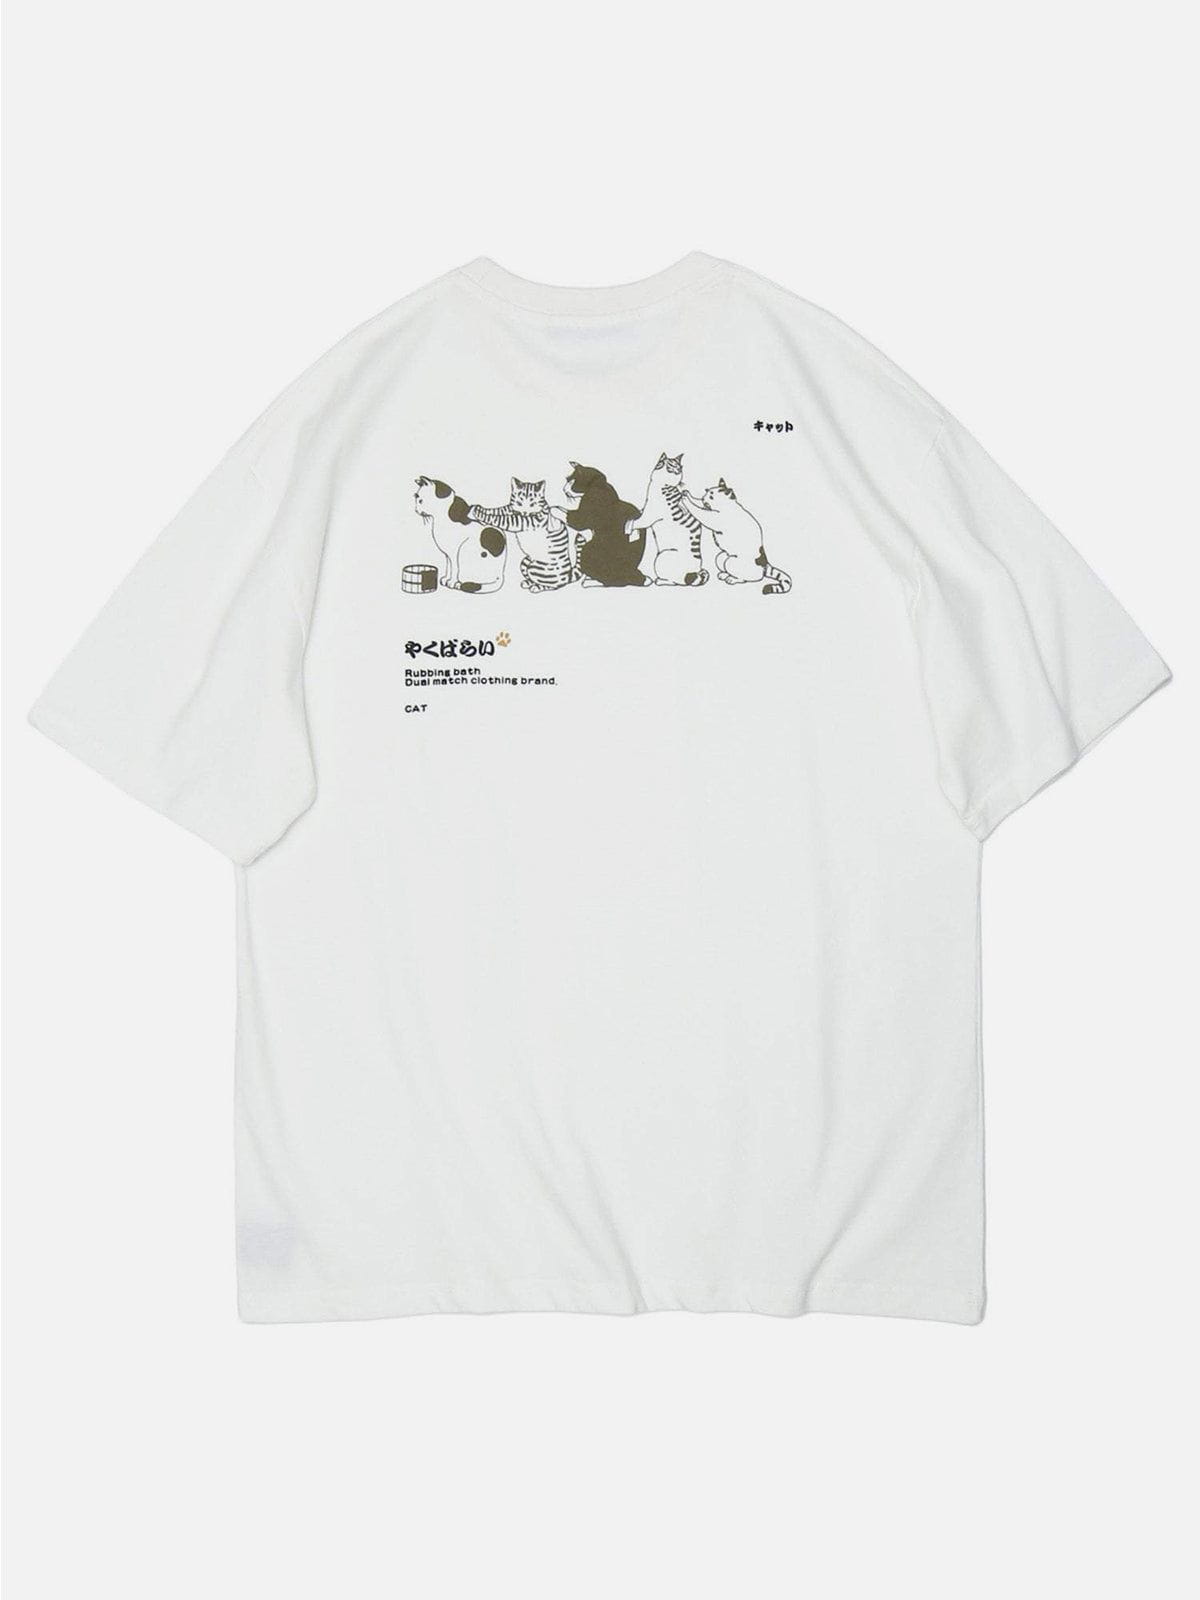 AE "Queue" Cat Graphic Oversized Tee Streetwear Brand Techwear Combat Tactical YUGEN THEORY